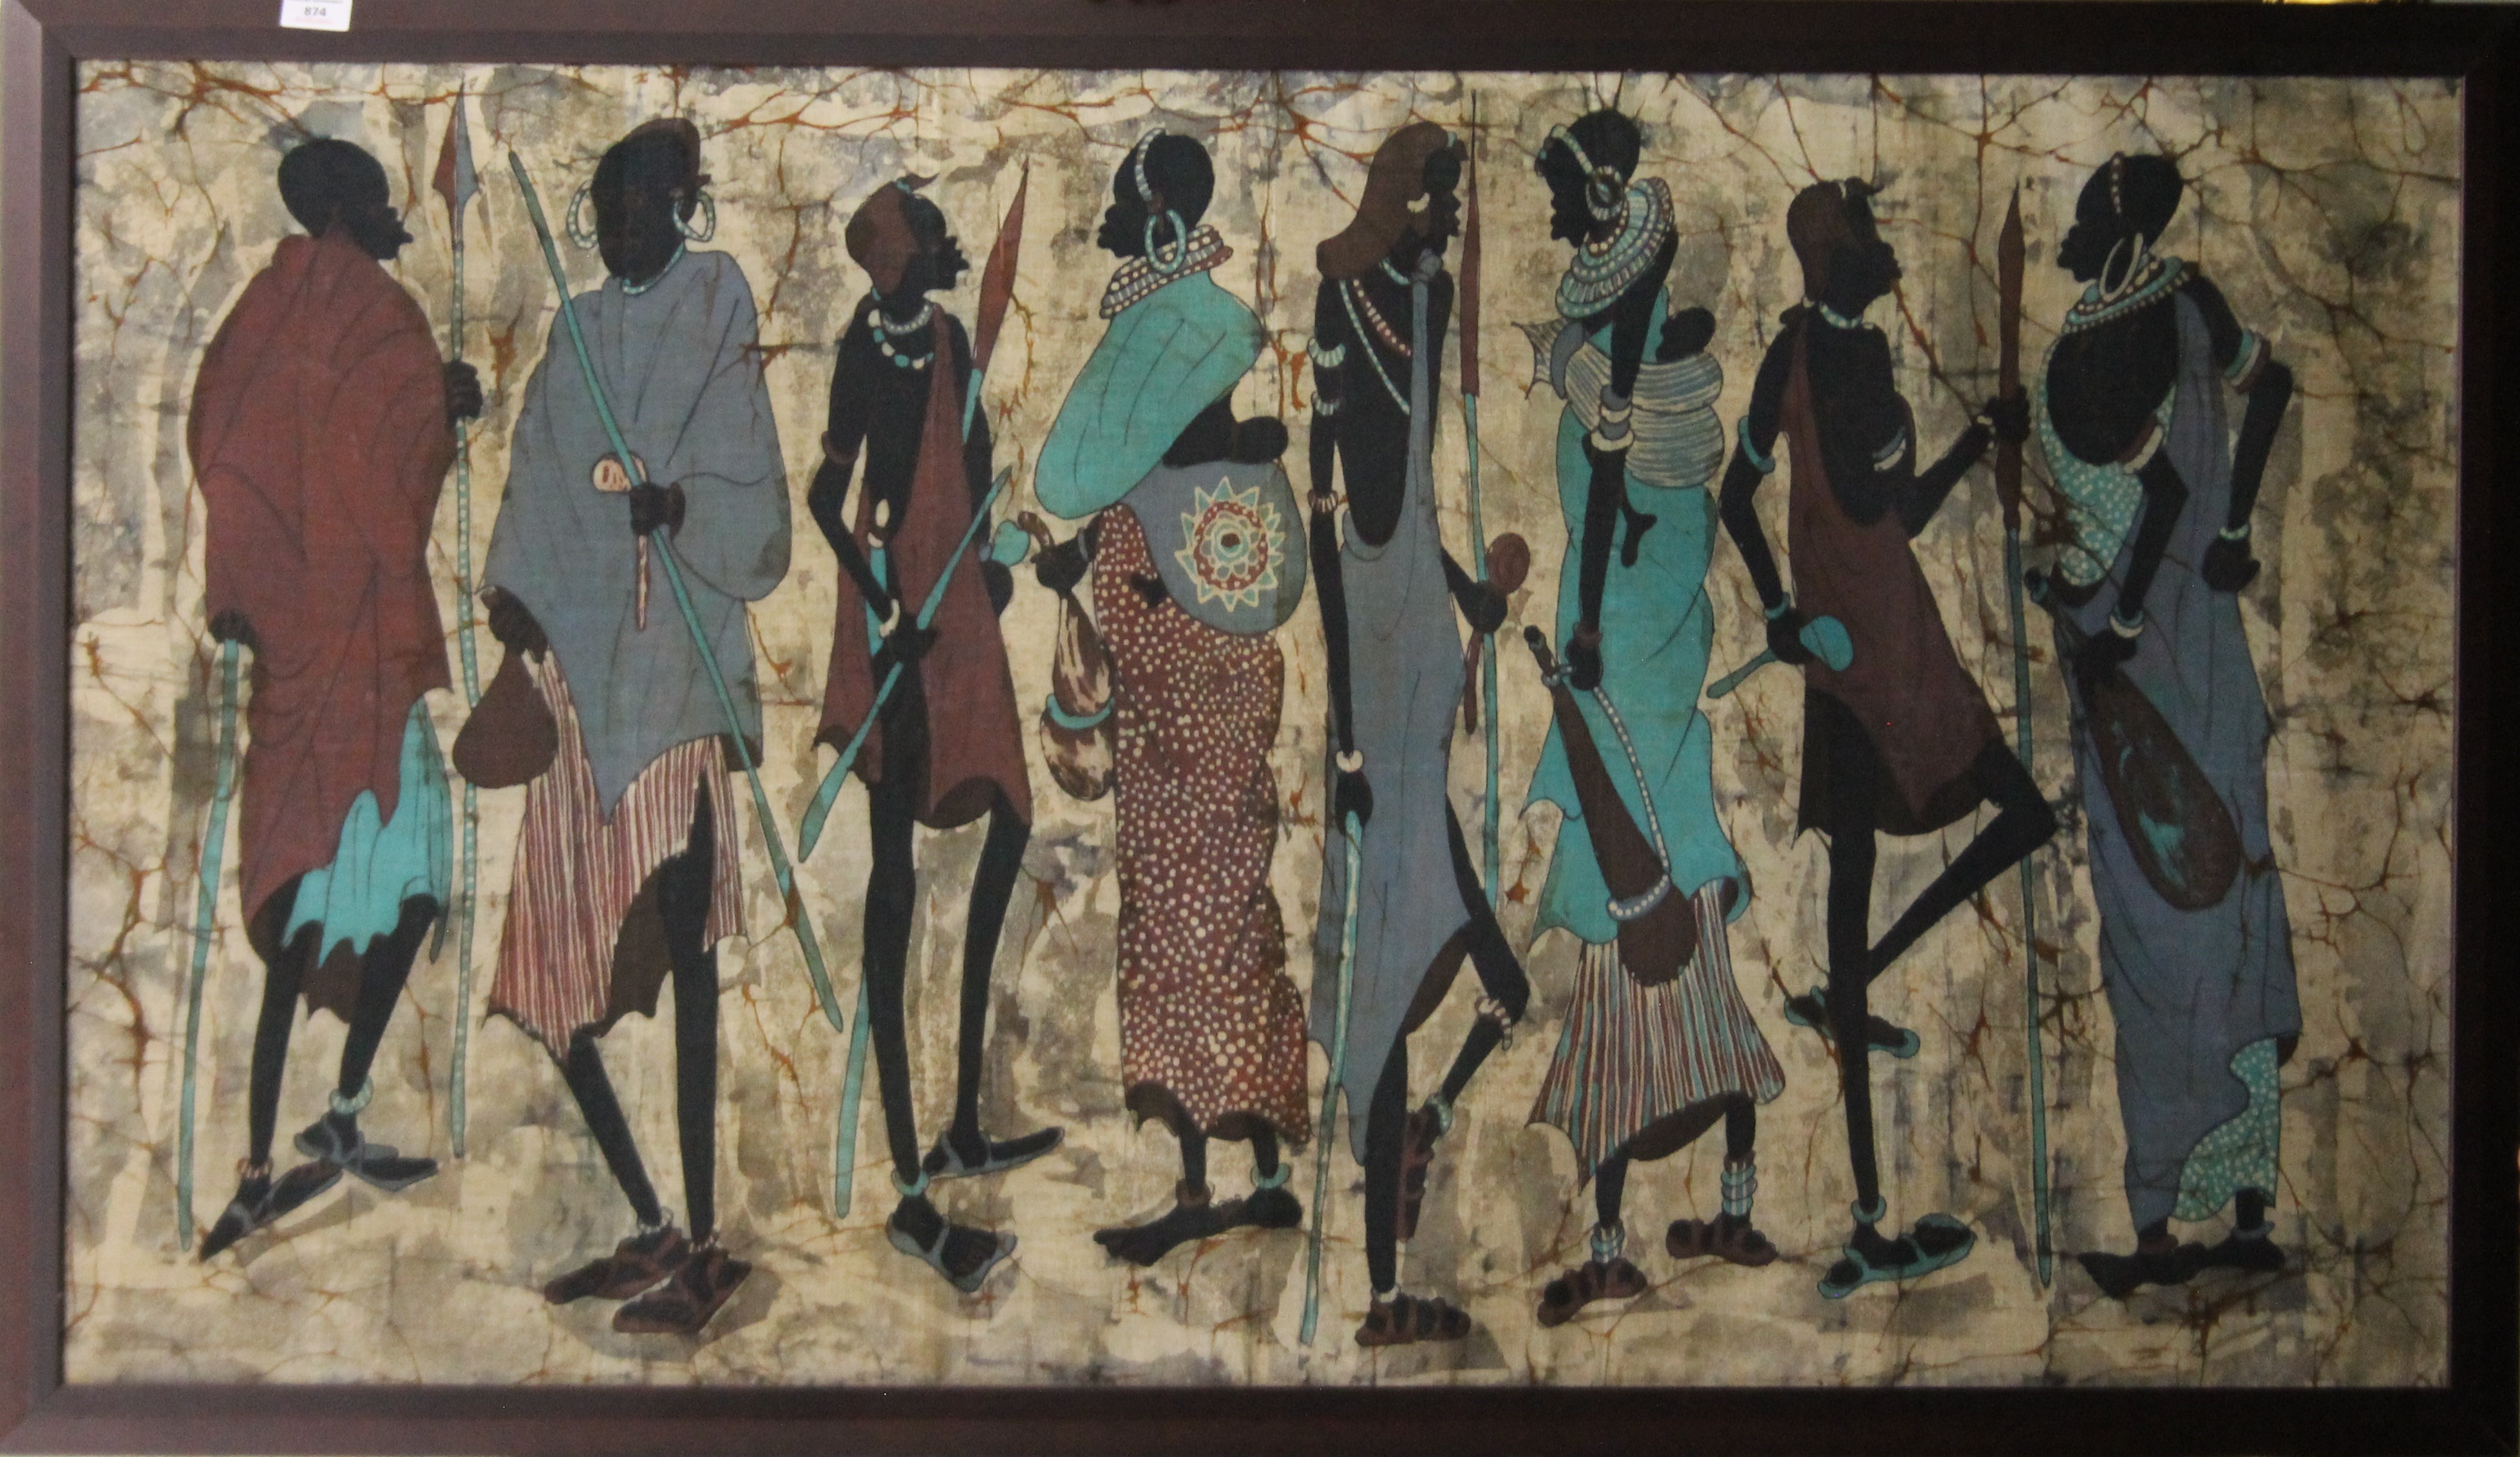 EAST AFRICAN SCHOOL, Tribesmen and Women, print on fabric, framed. 136 x 75 cm. - Image 2 of 3